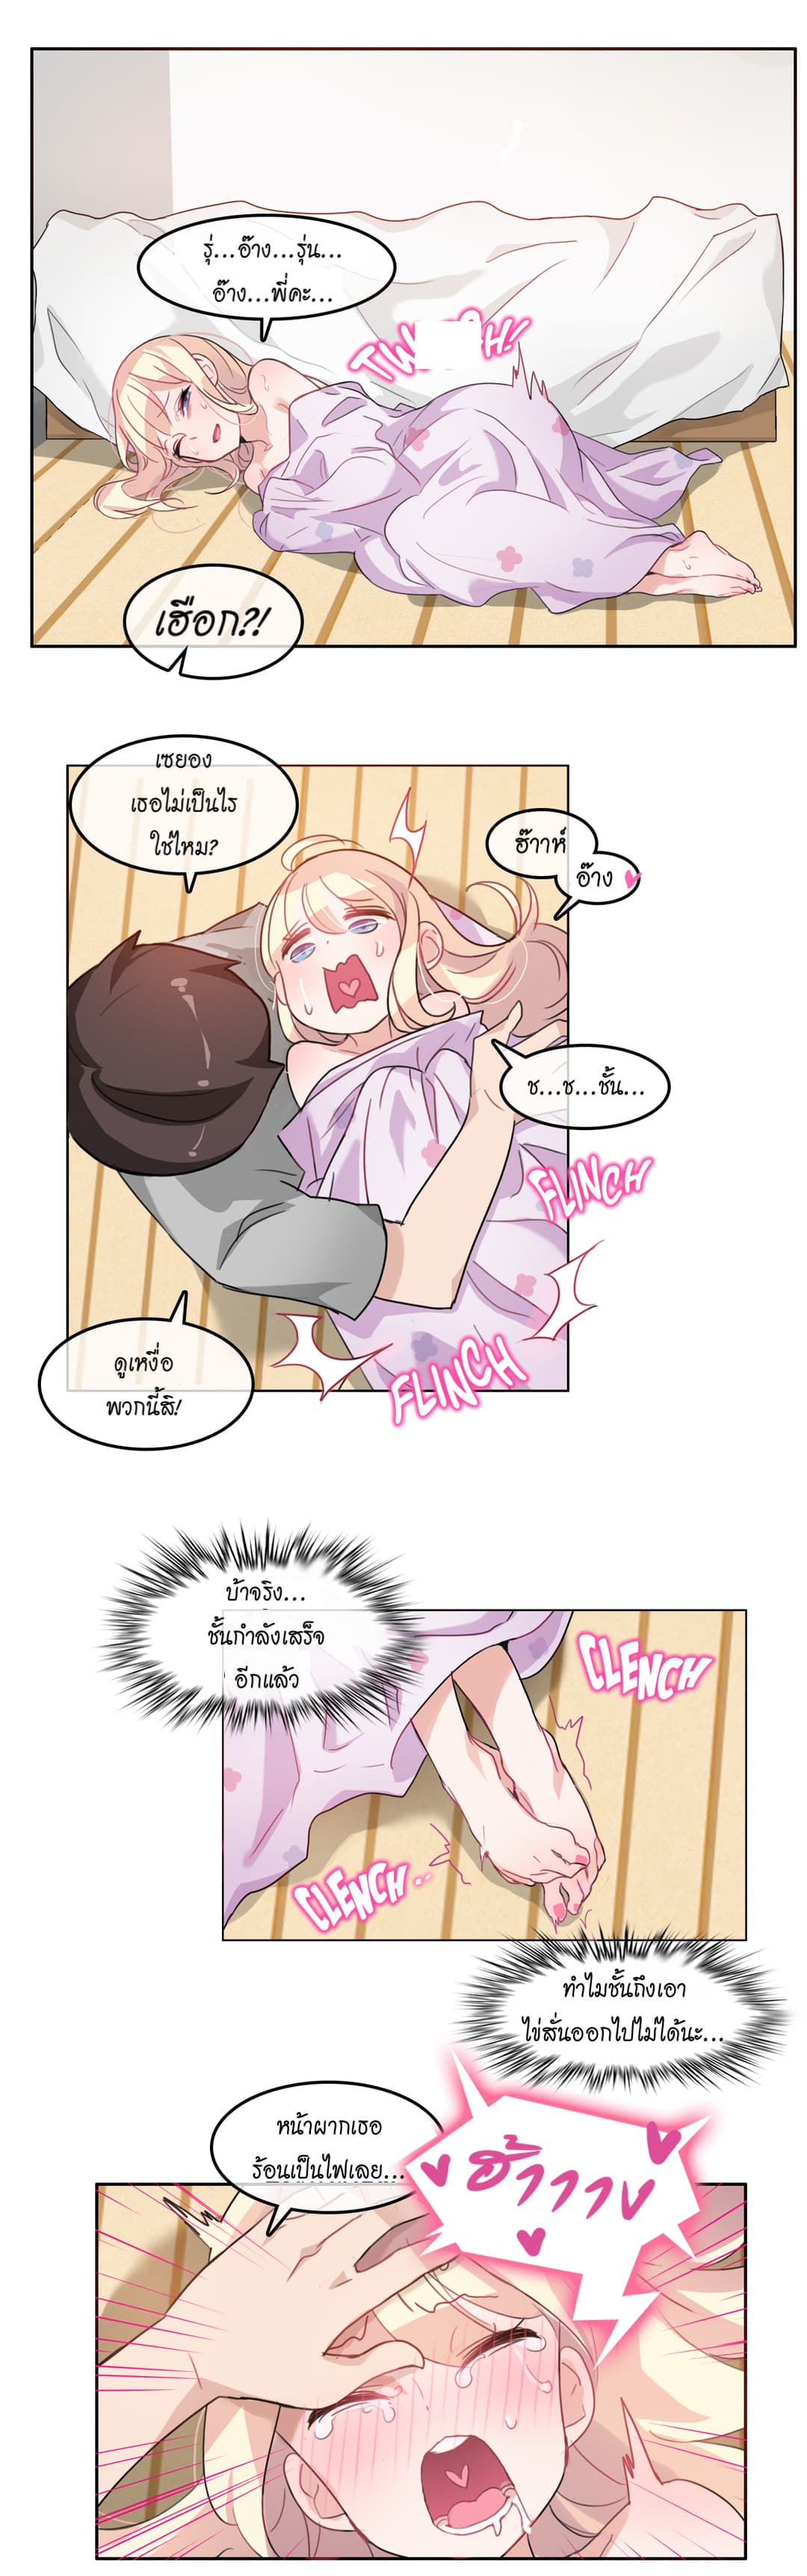 A Pervert’s Daily Life 7 (19)